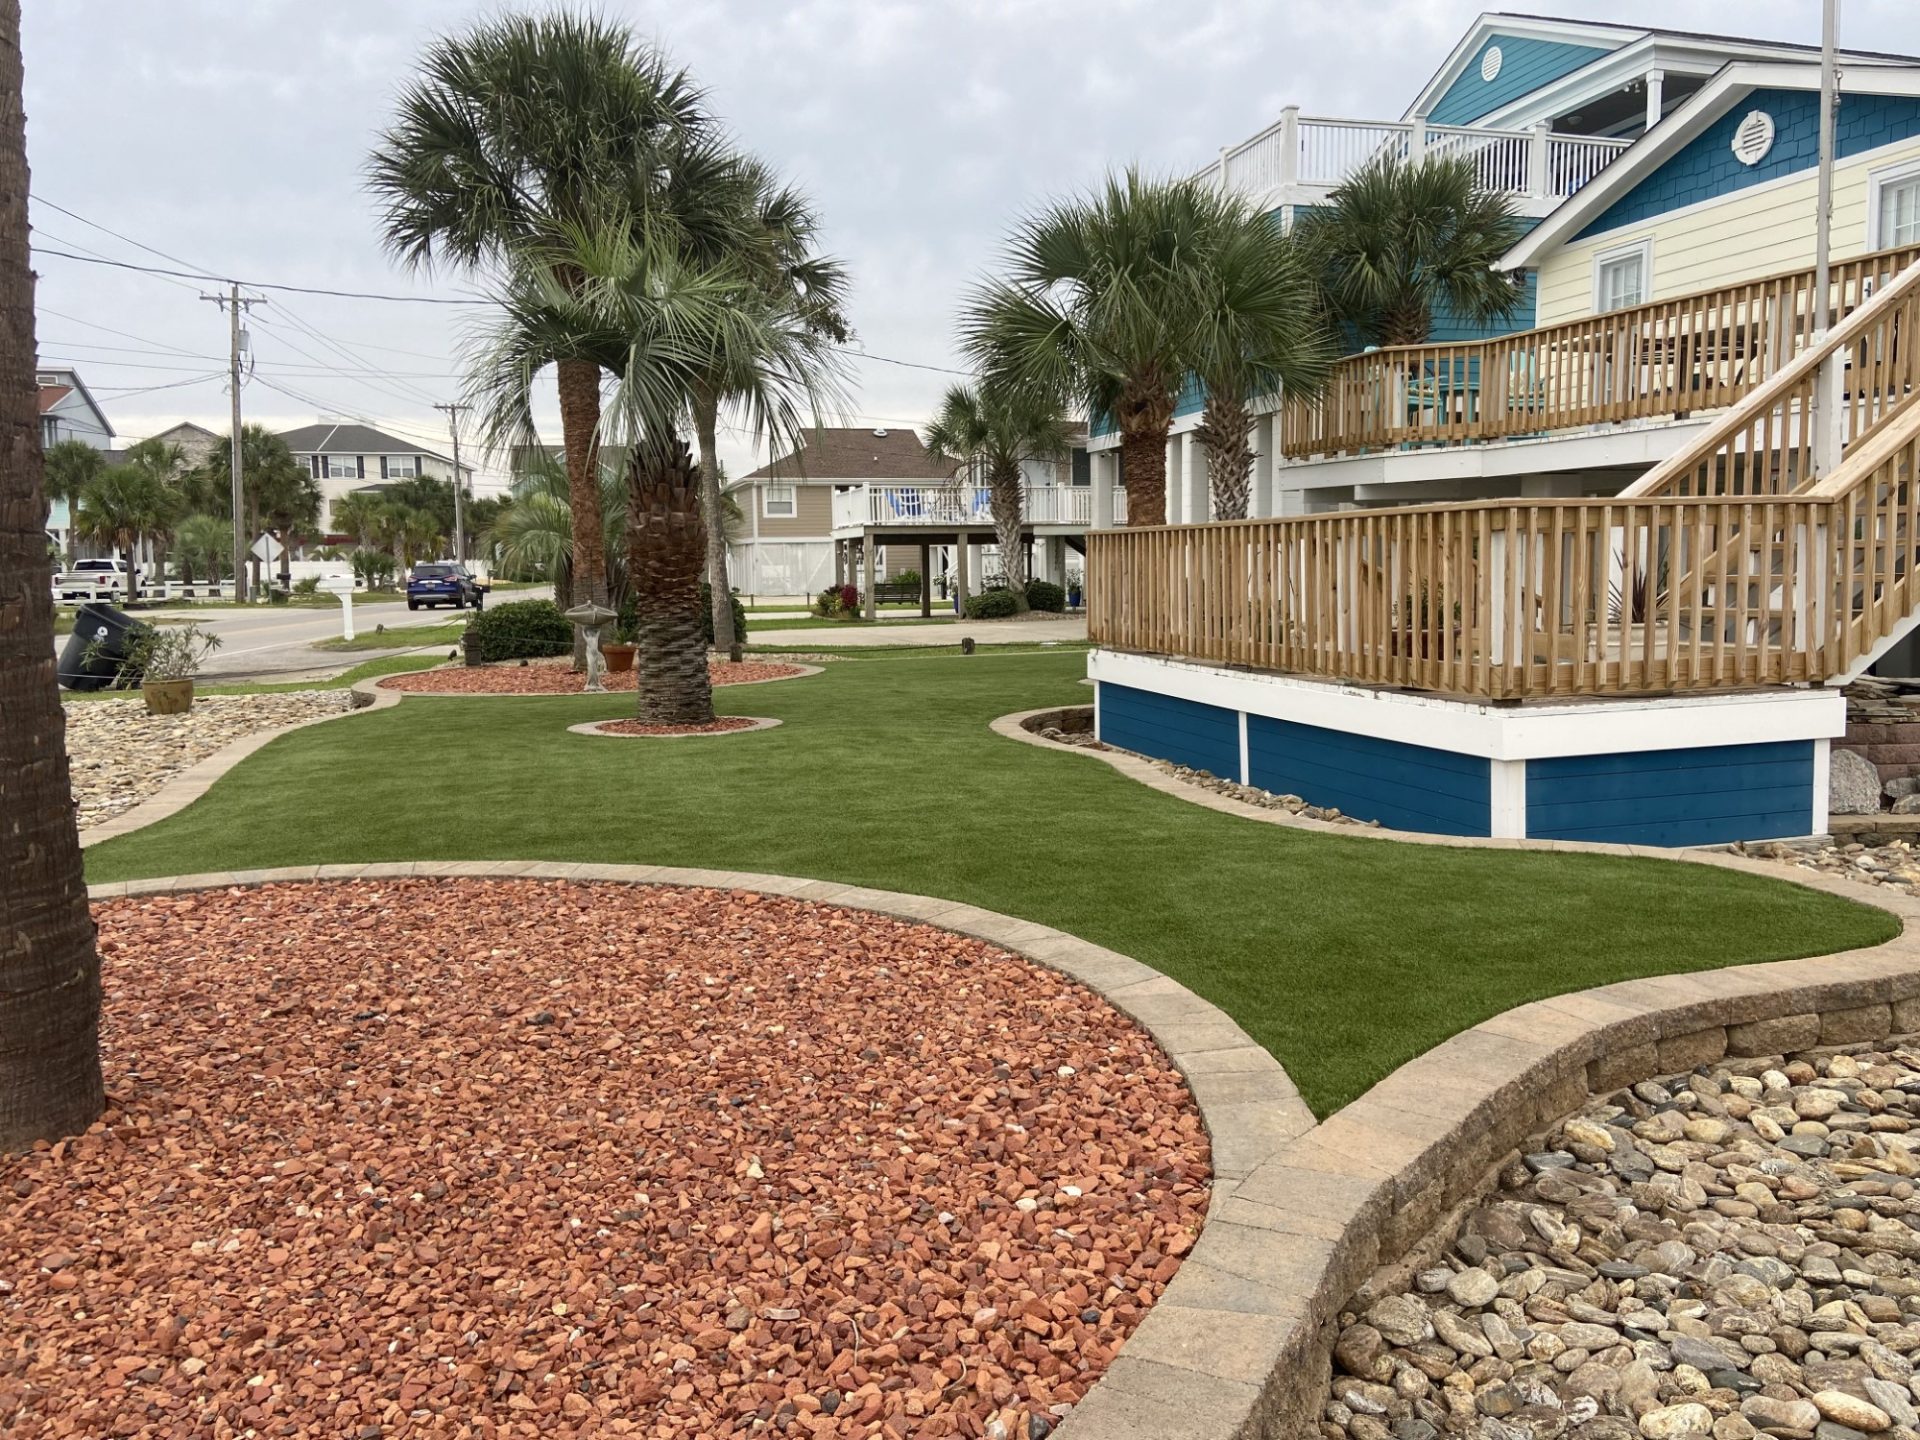 Shot of artificial grass front lawn with blue house